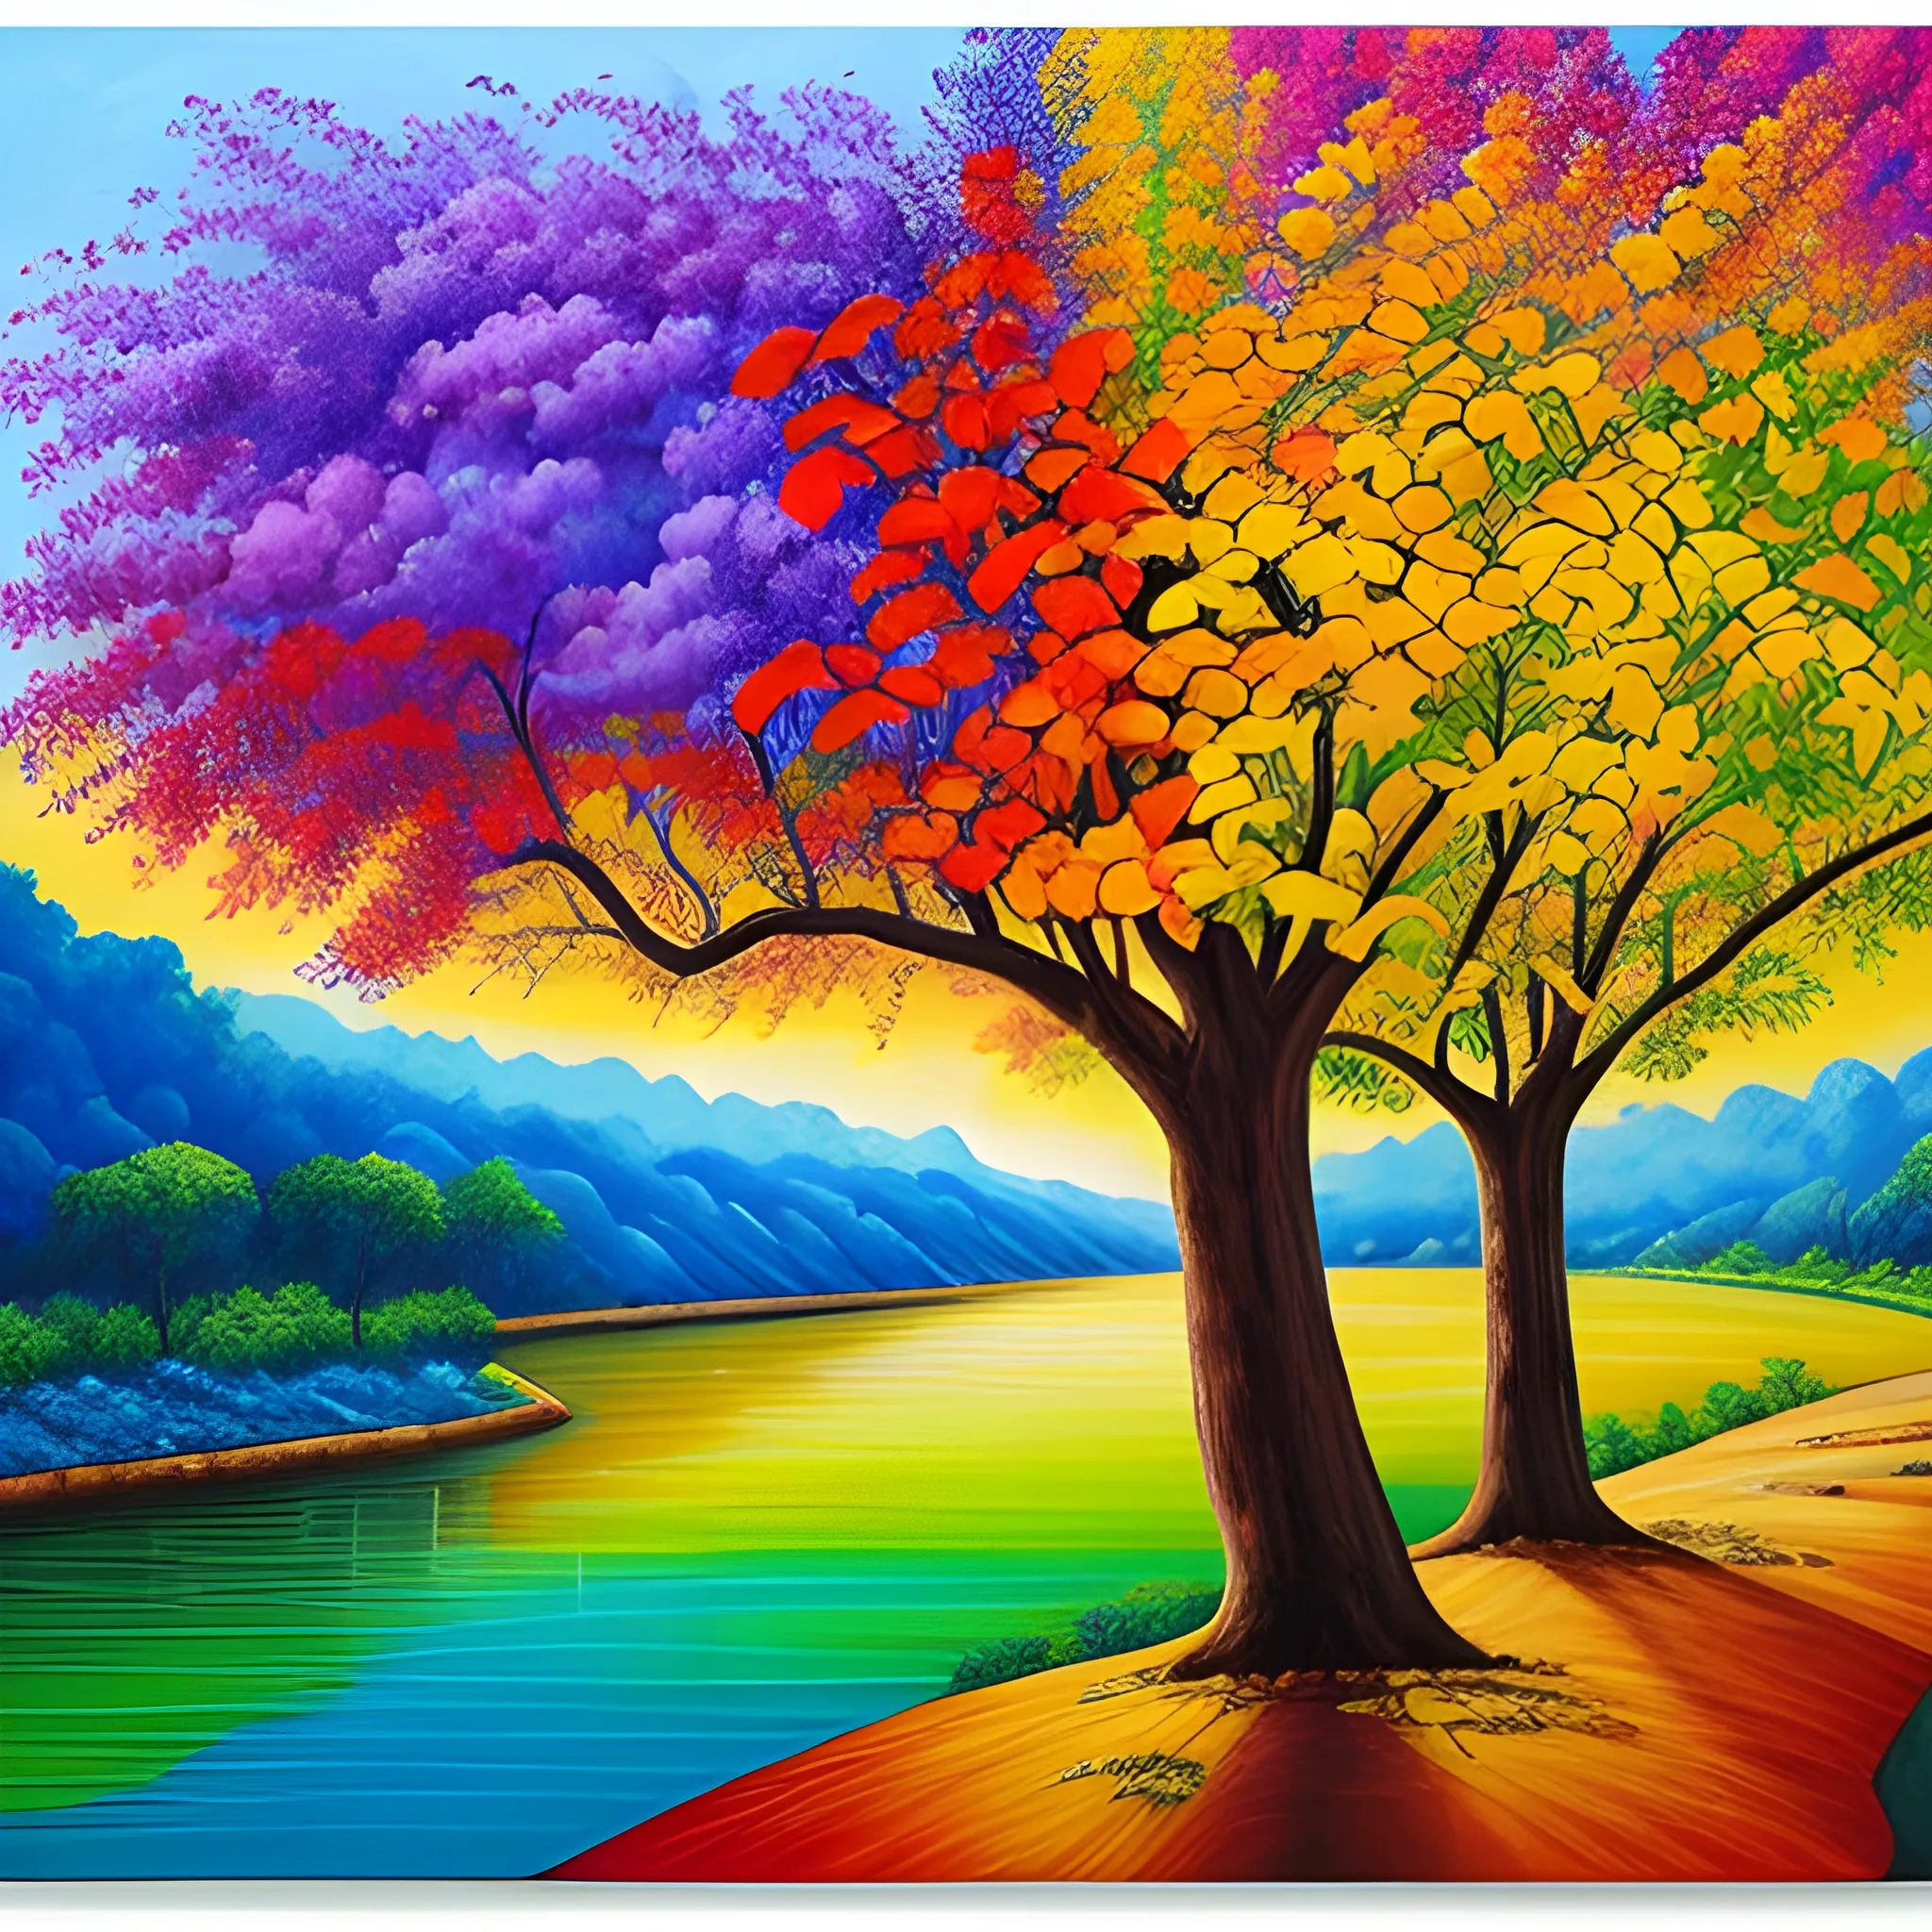 A vibrant painting showcasing the monthly-bearing fruit and healing properties of the trees of life on either side of the river. The artwork conveys the abundance and eternal blessings that await the nations in the new heaven and earth. -ar 1:1 -s 1000 -q 3